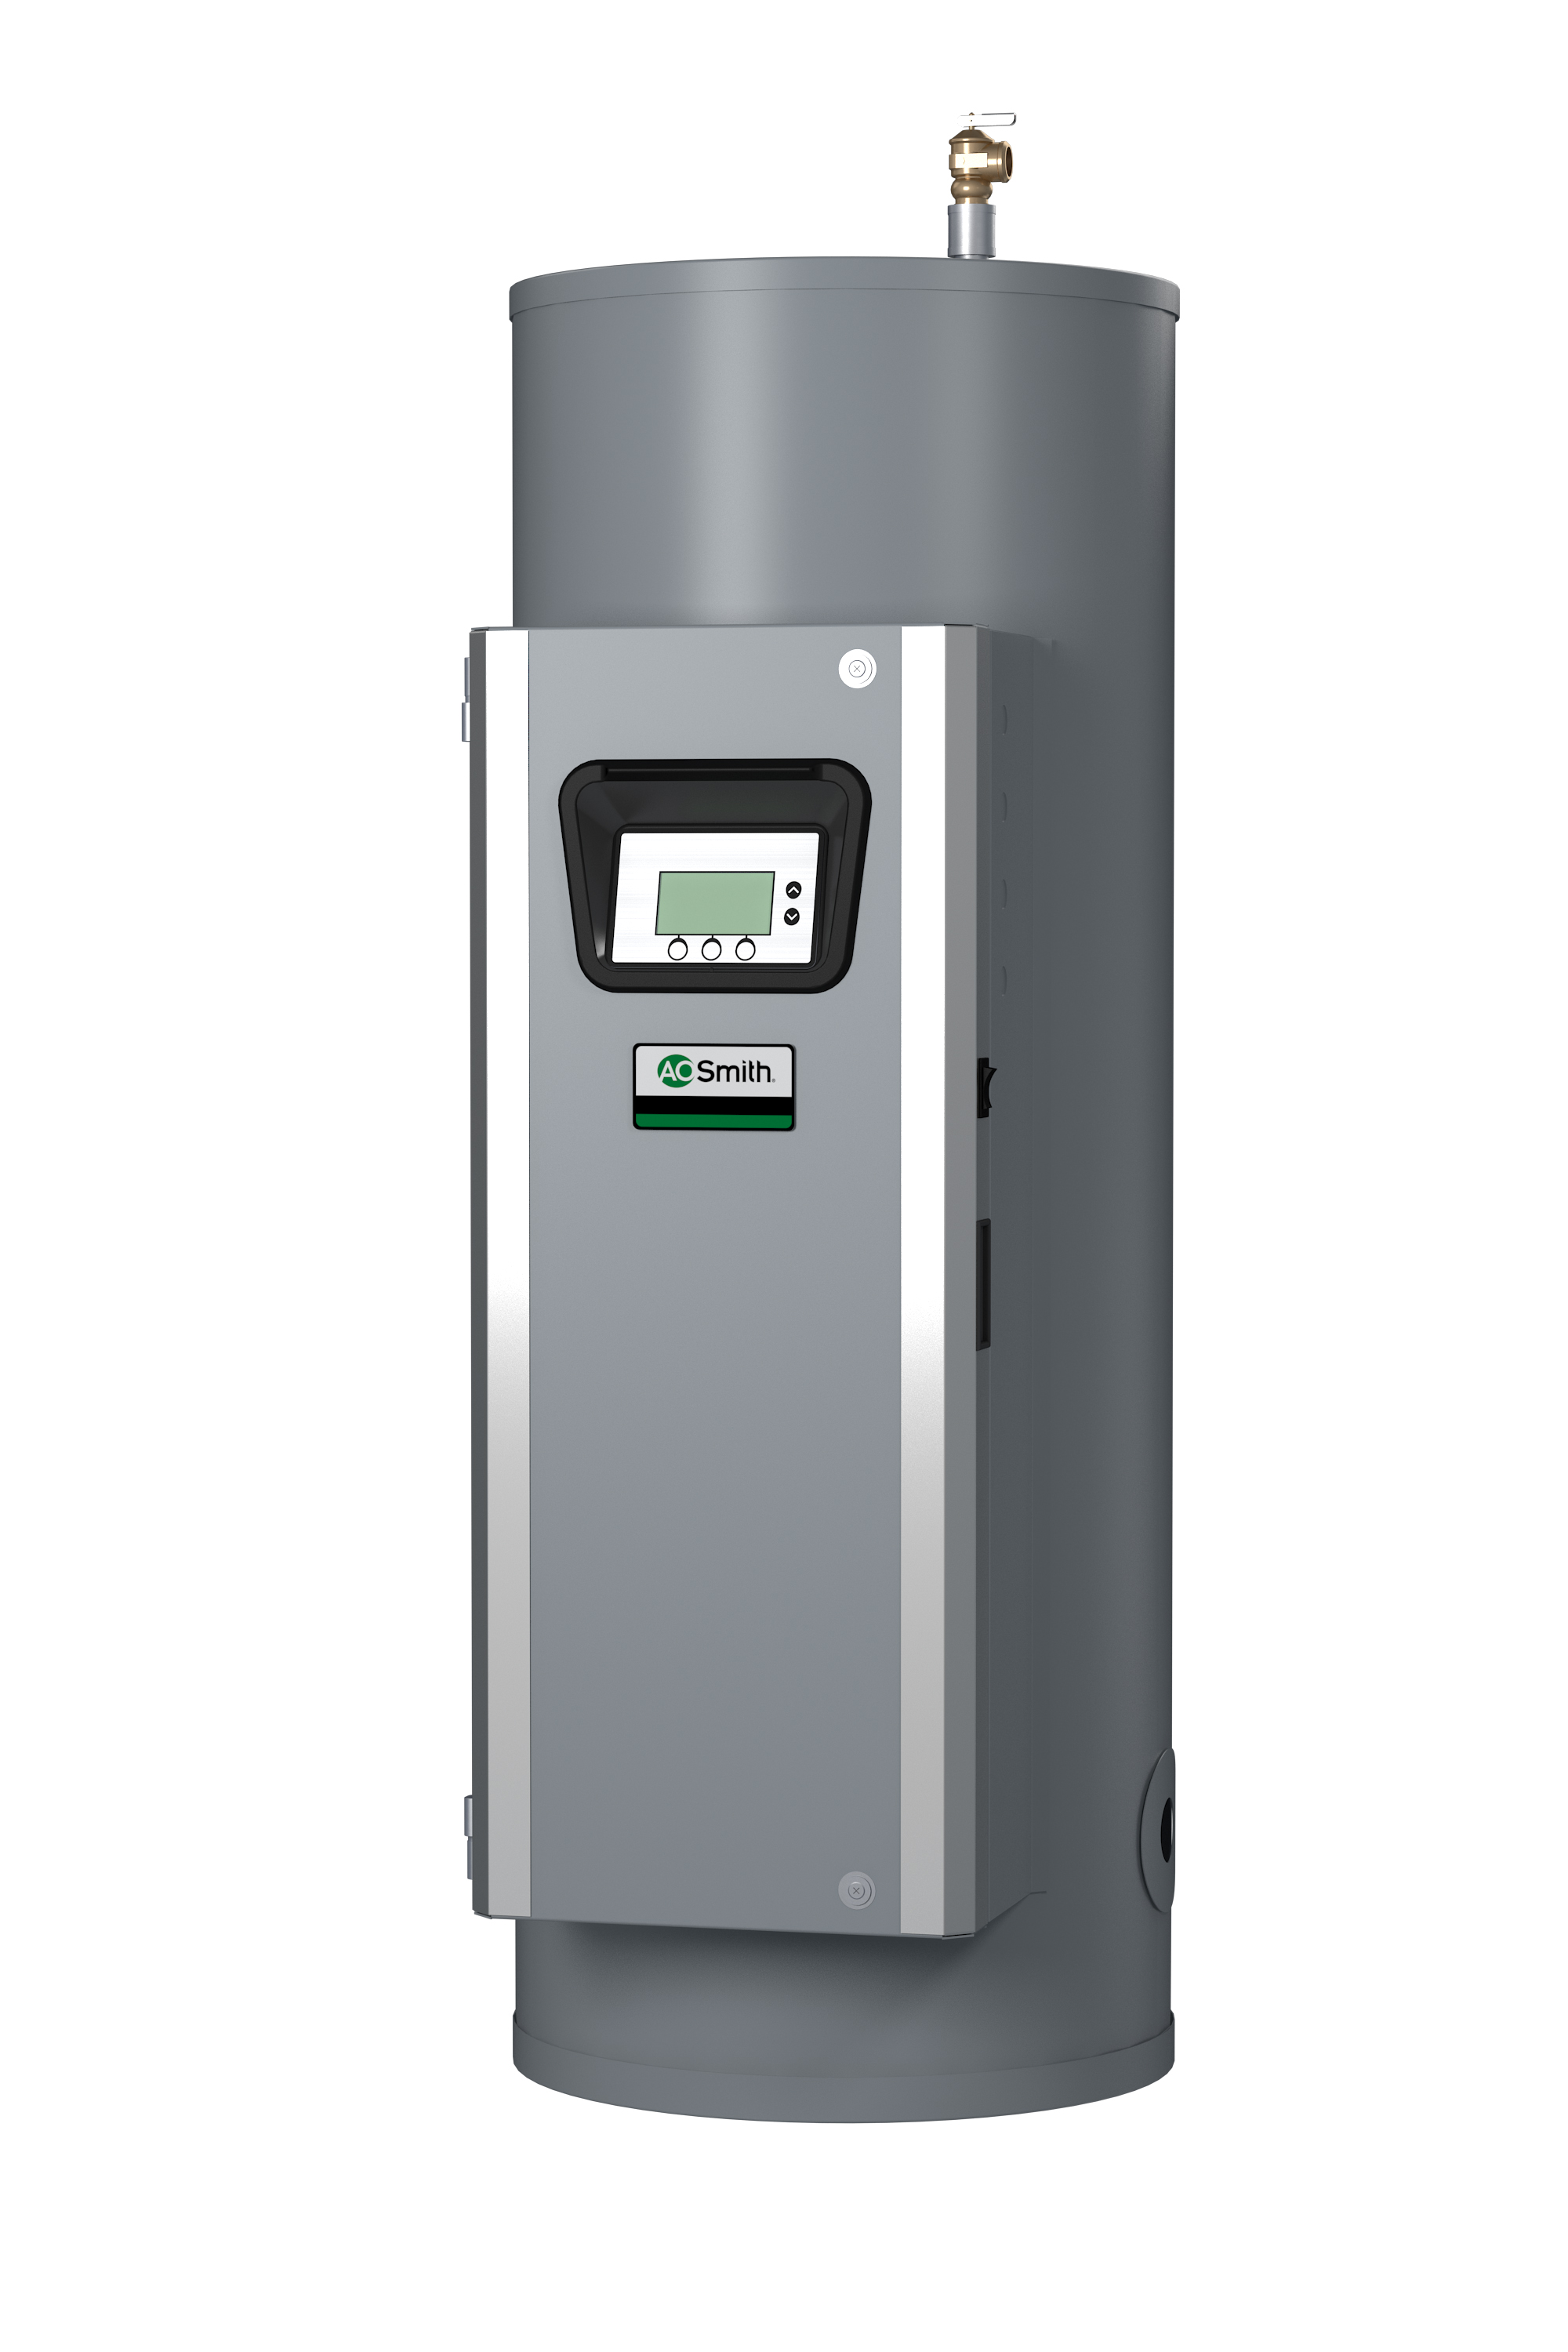 AO SMITH DSE-100A-18, 100 GALLONS, 18KW, 240 VOLT, 75 AMPS, 1 PHASE, 1 ELEMENT, ASME CUSTOM Xi SERIES HEAVY DUTY COMMERCIAL ELECTRIC WATER HEATER